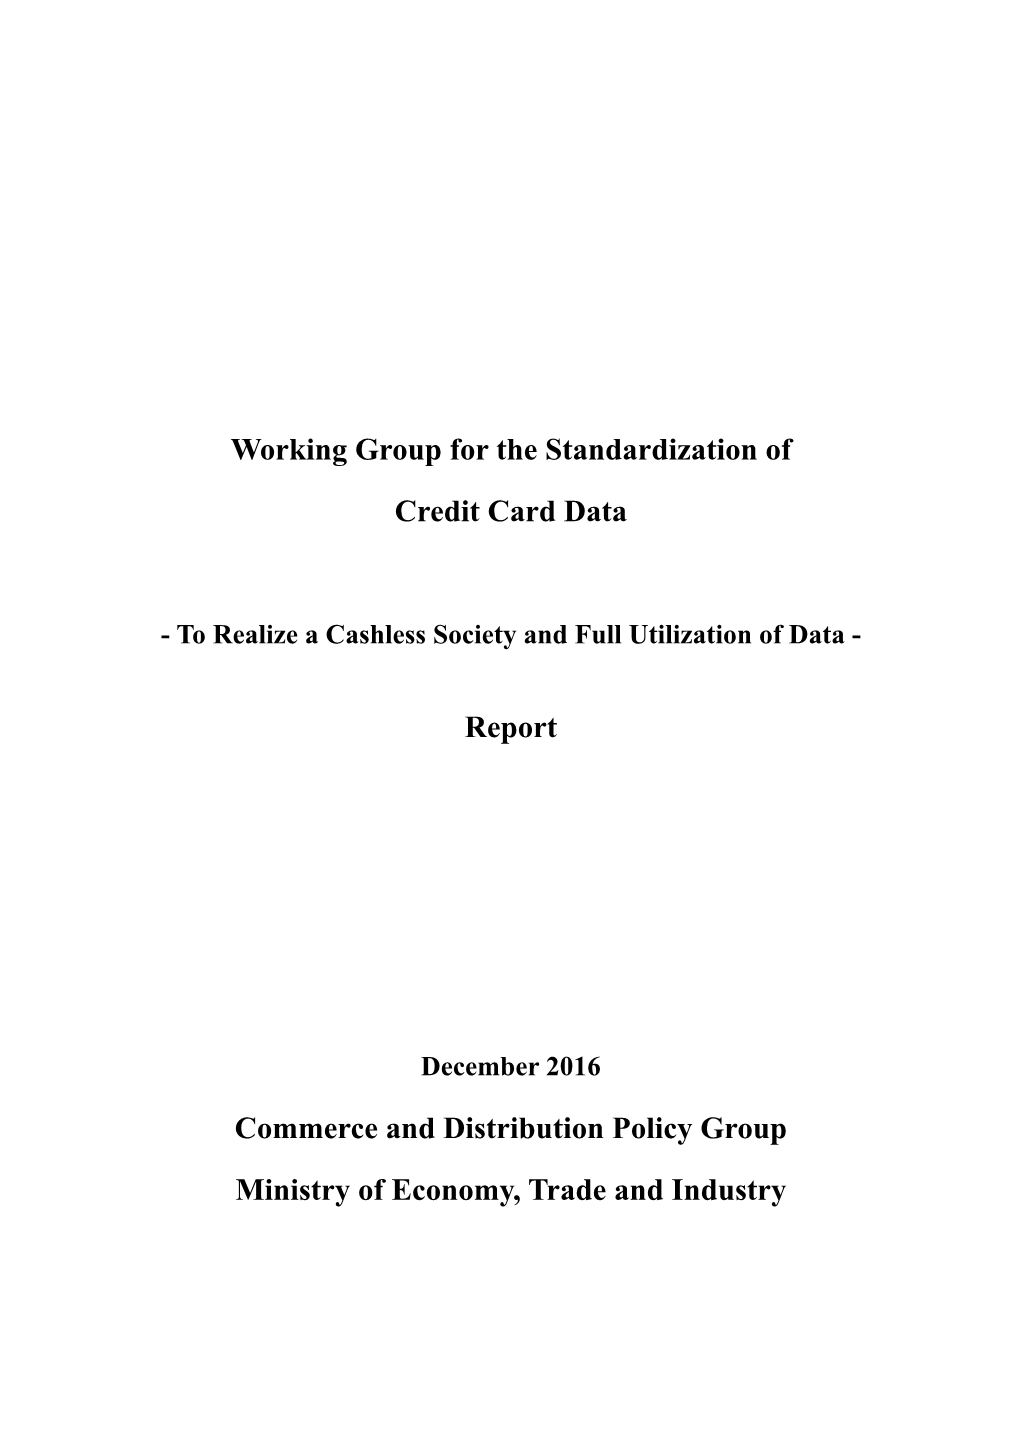 Working Group for the Standardization of Credit Card Data Report